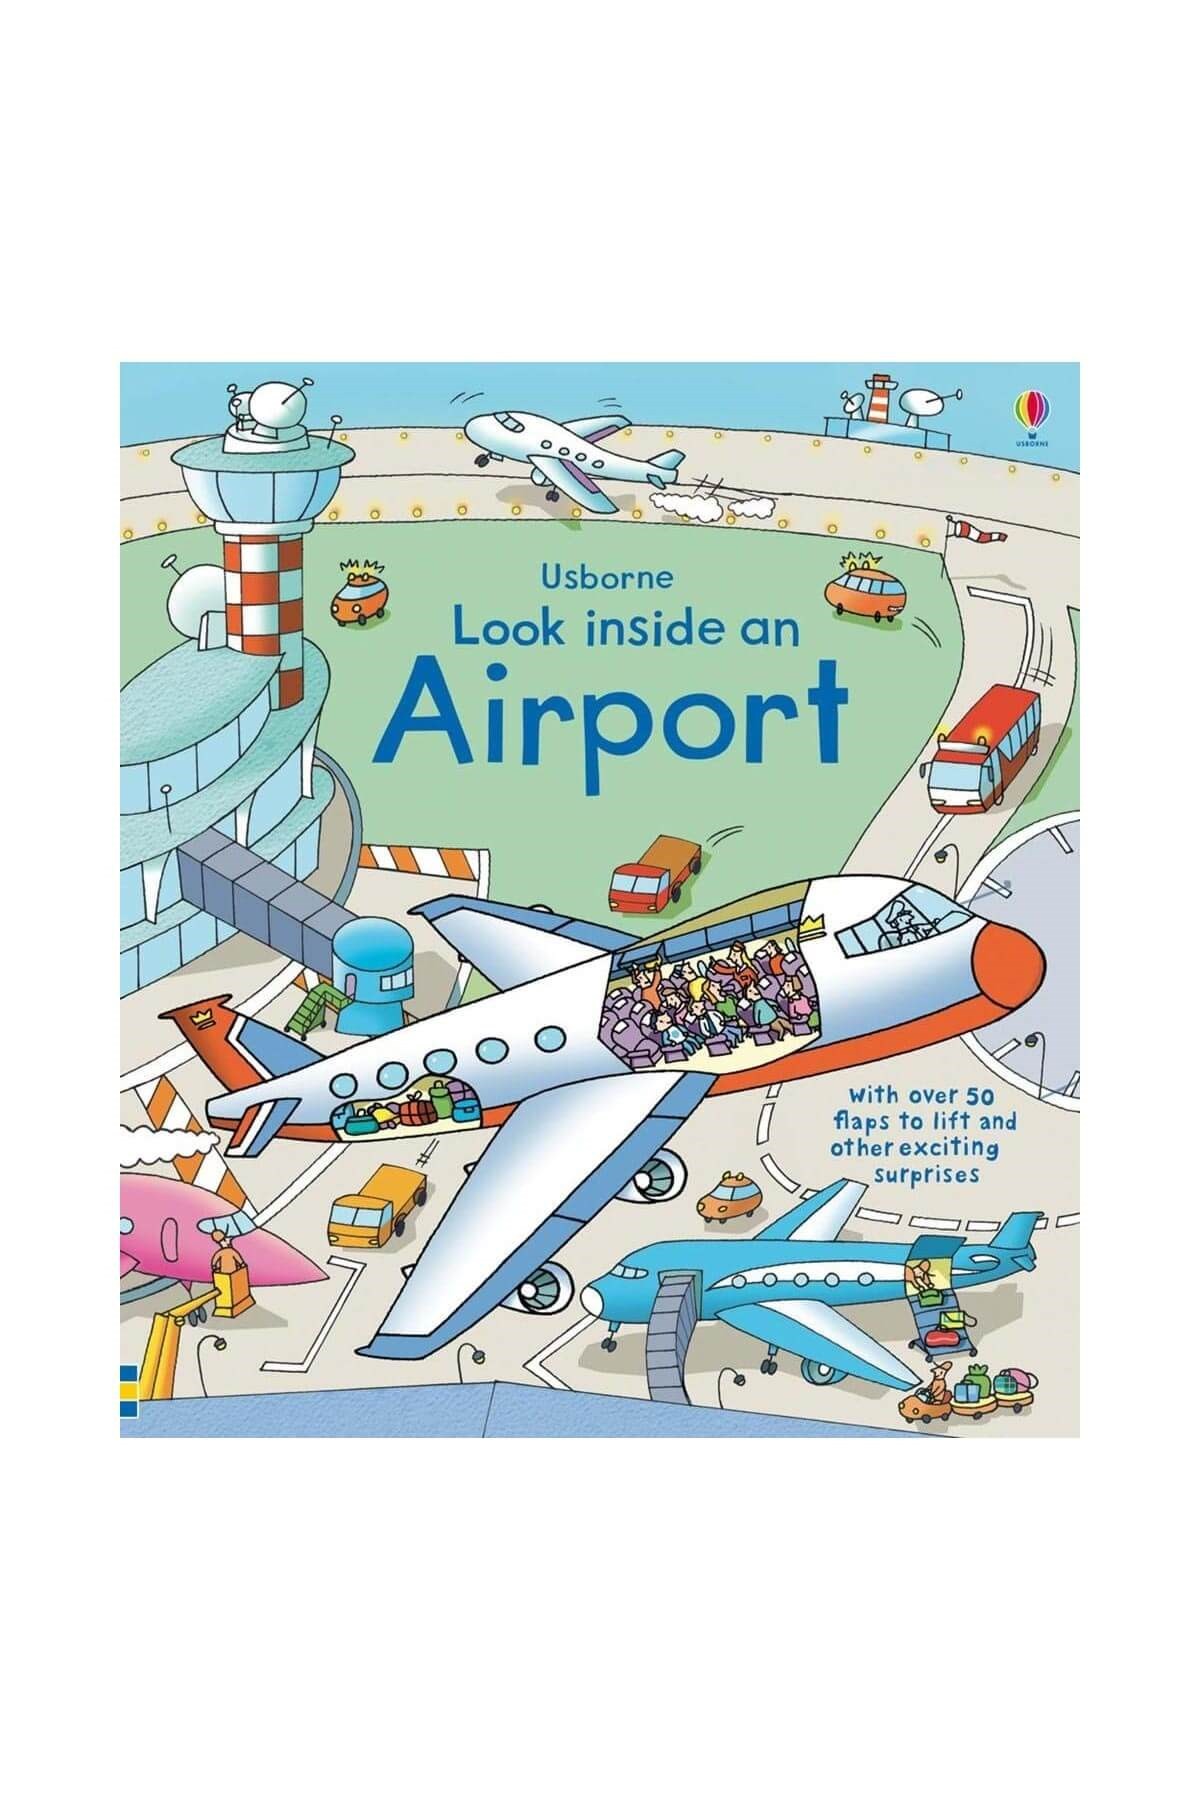 The Usborne Look Inside An Airport